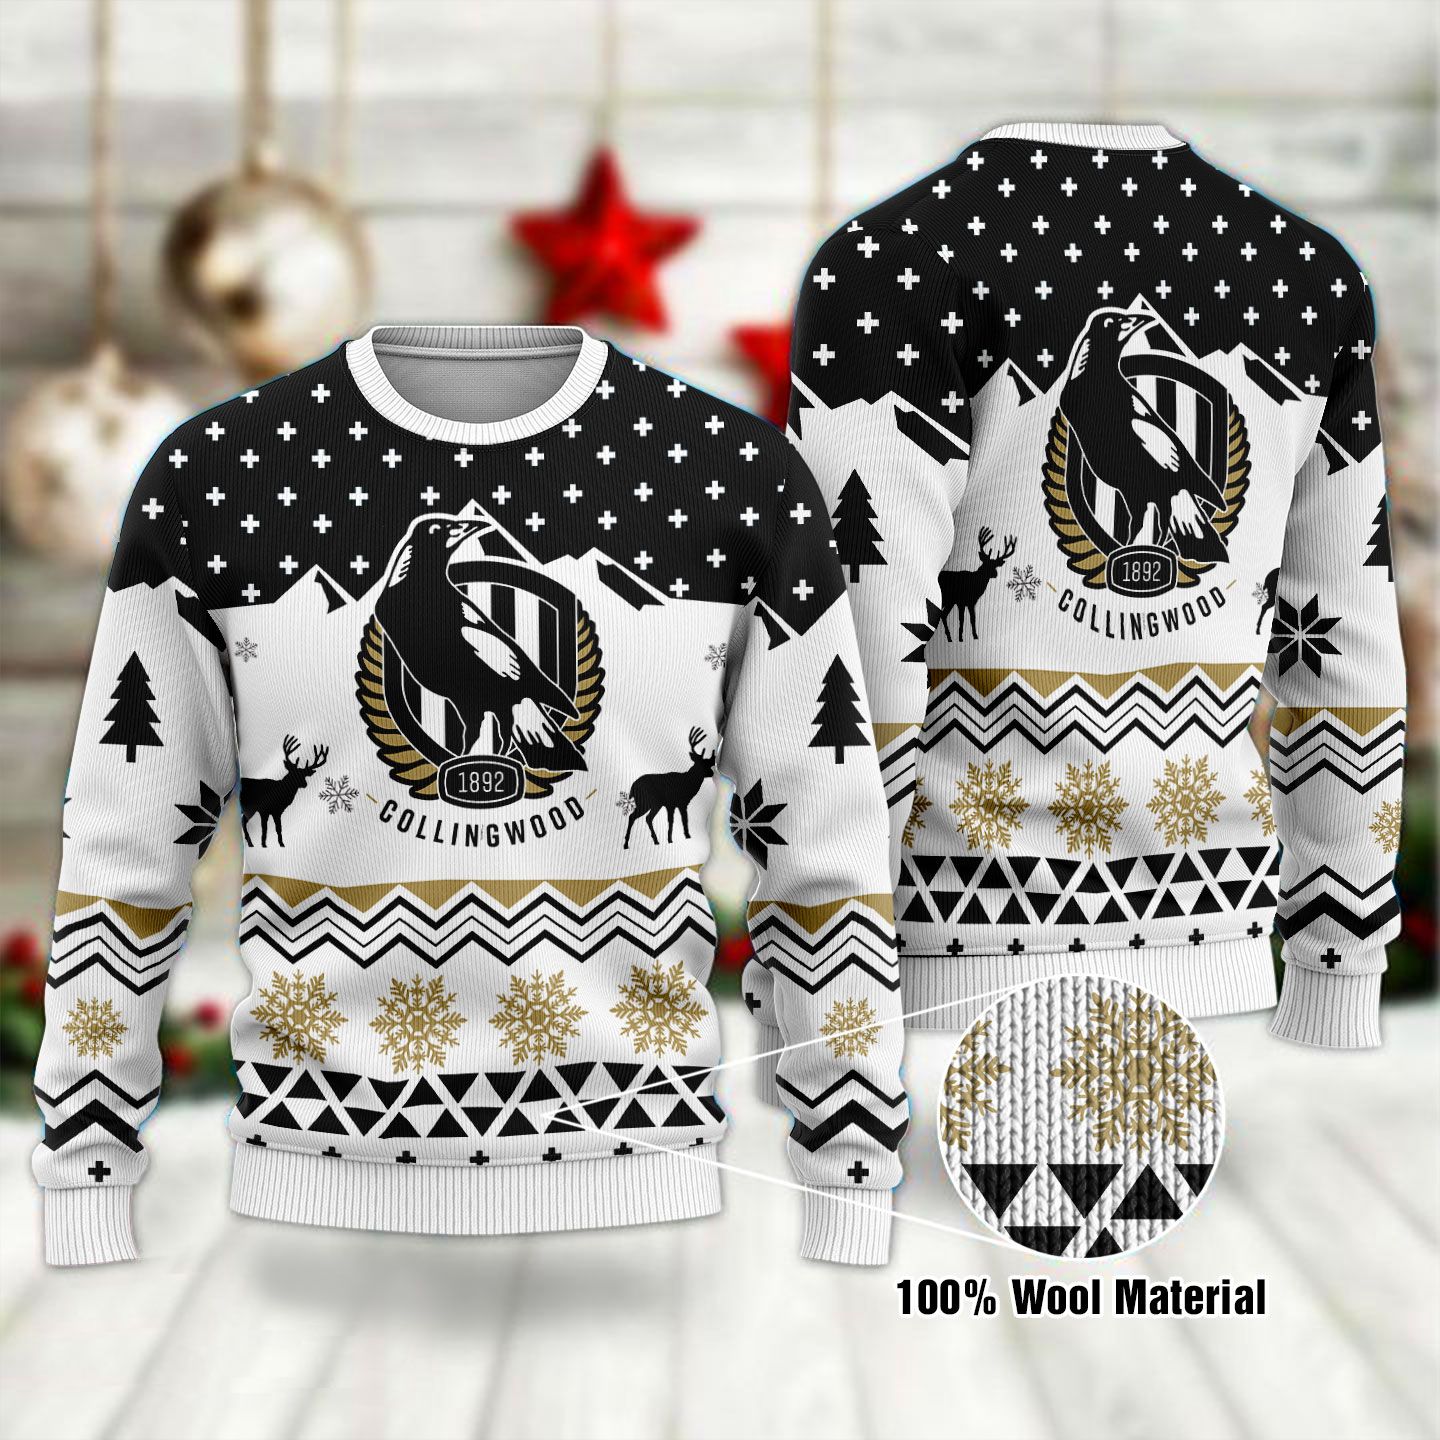 Middily- Collingwood Football Club AFL - Ugly Xmas Sweater,Holiday 2021 Sweater,Secret Santa,Christmas Sweater Gift,Gag Gift - 3D Sweater